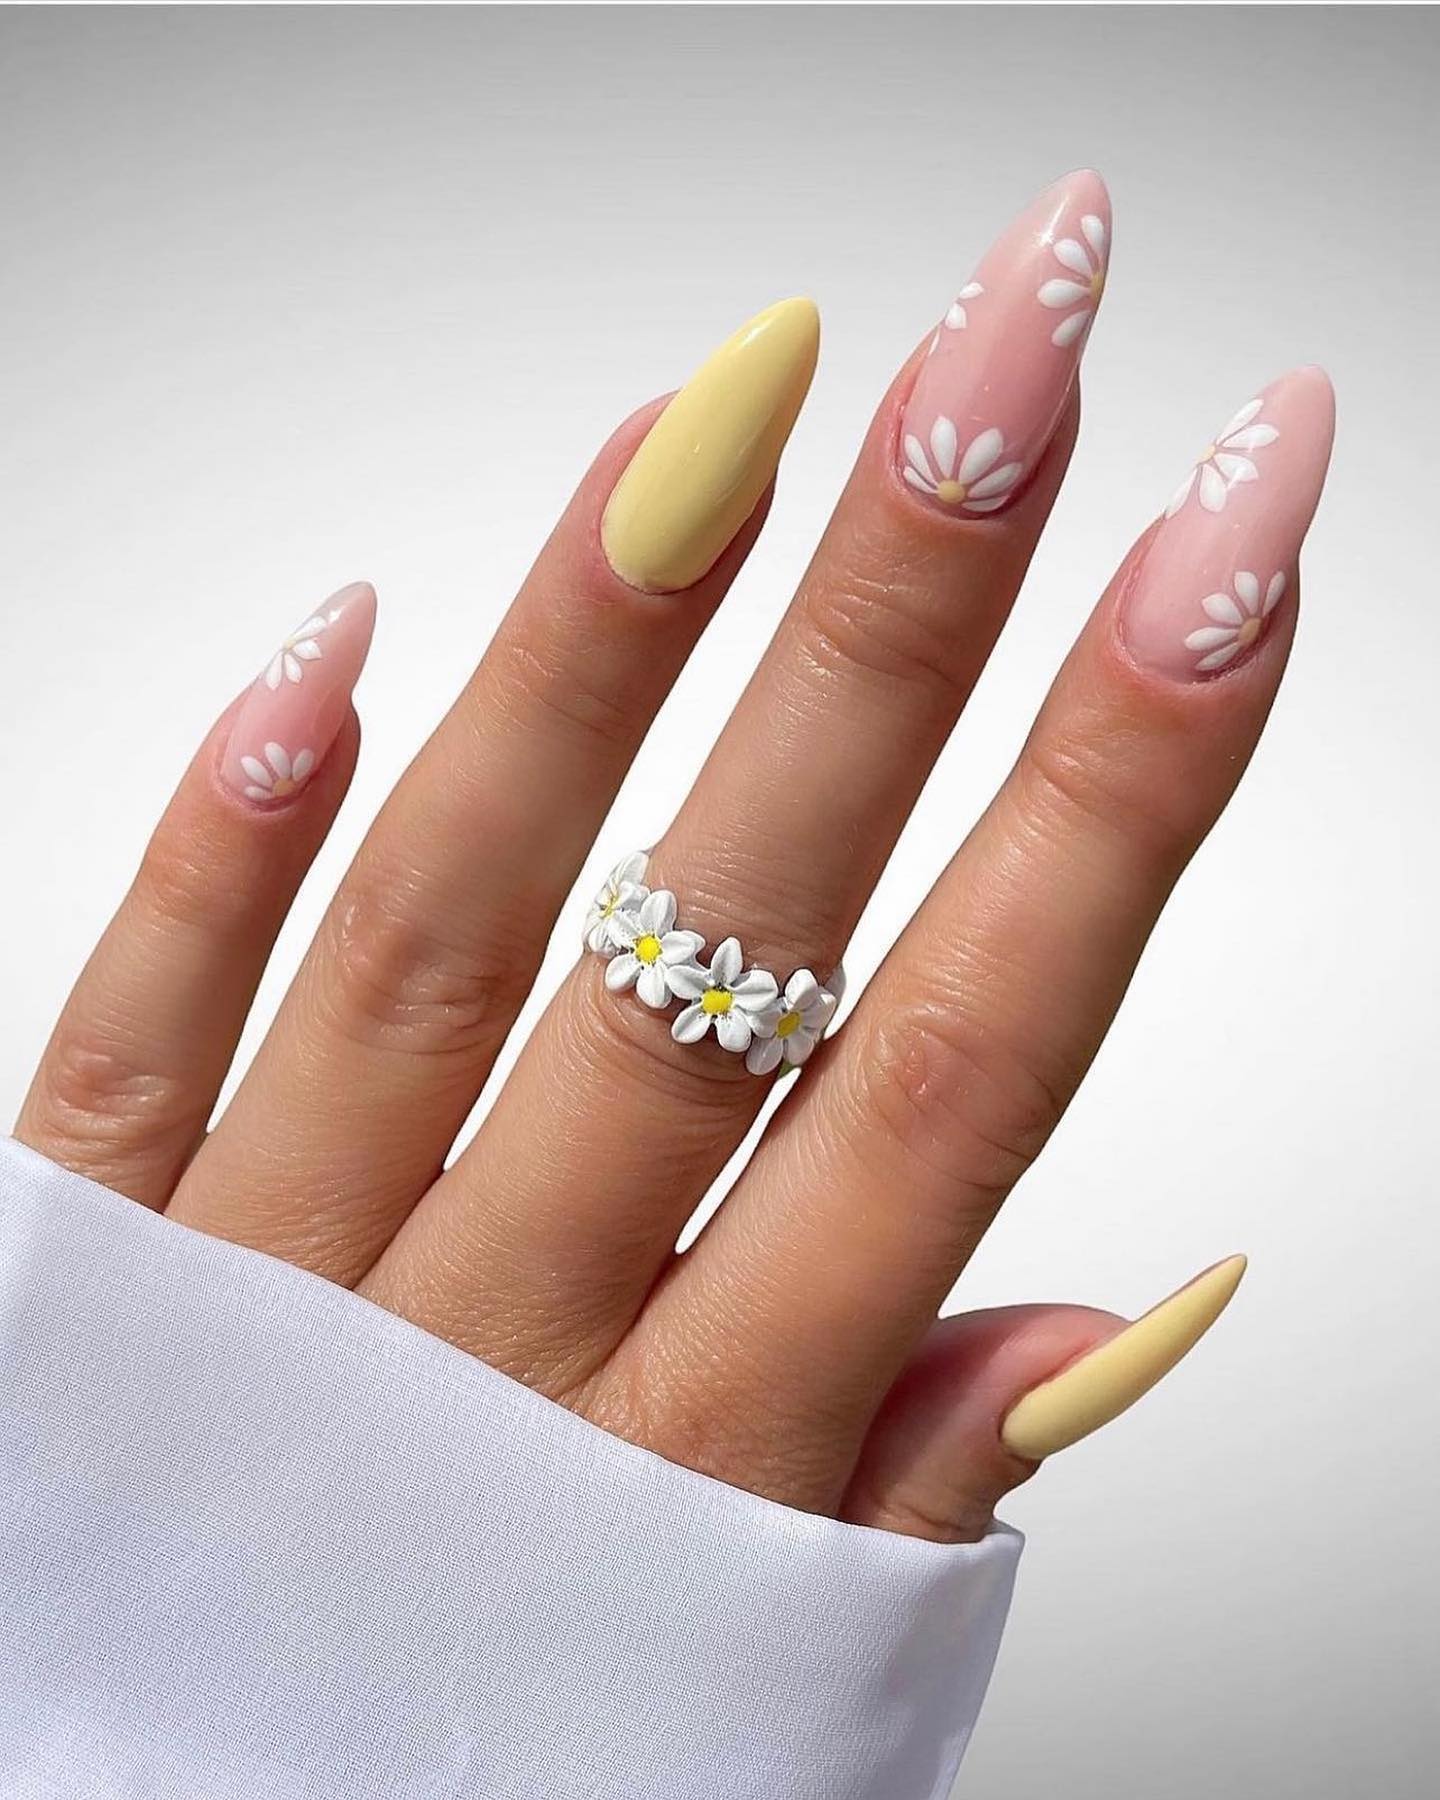 100 Pretty Spring Nail Designs To Try This Year images 3